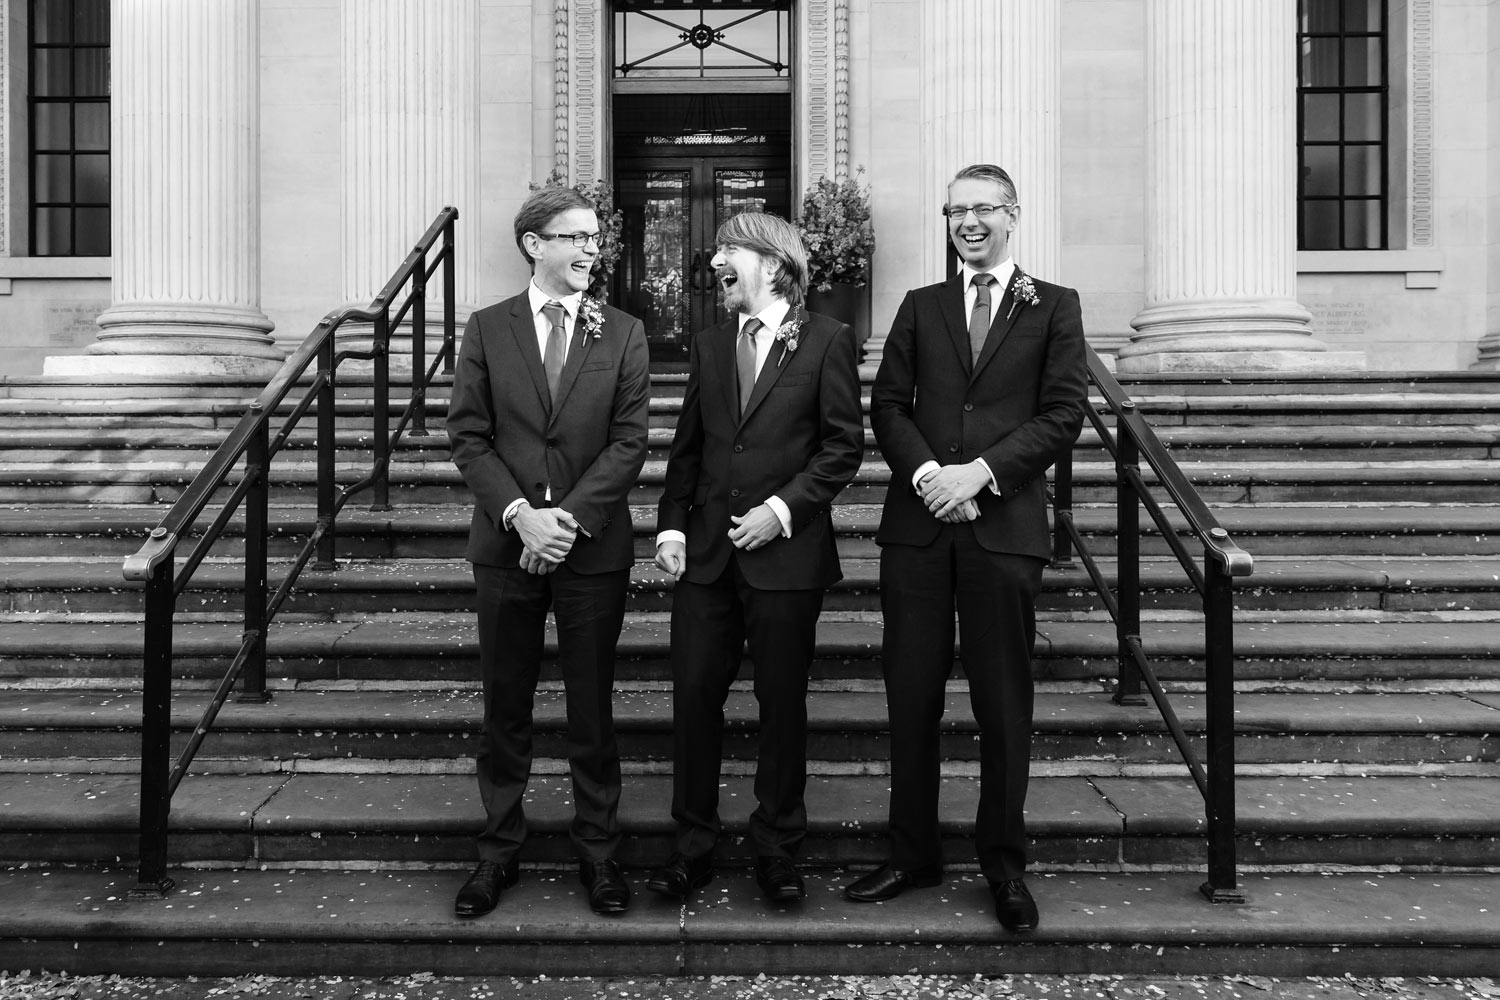 A groom and his groomsmen pose on the steps of Old Marylebone Town Hall